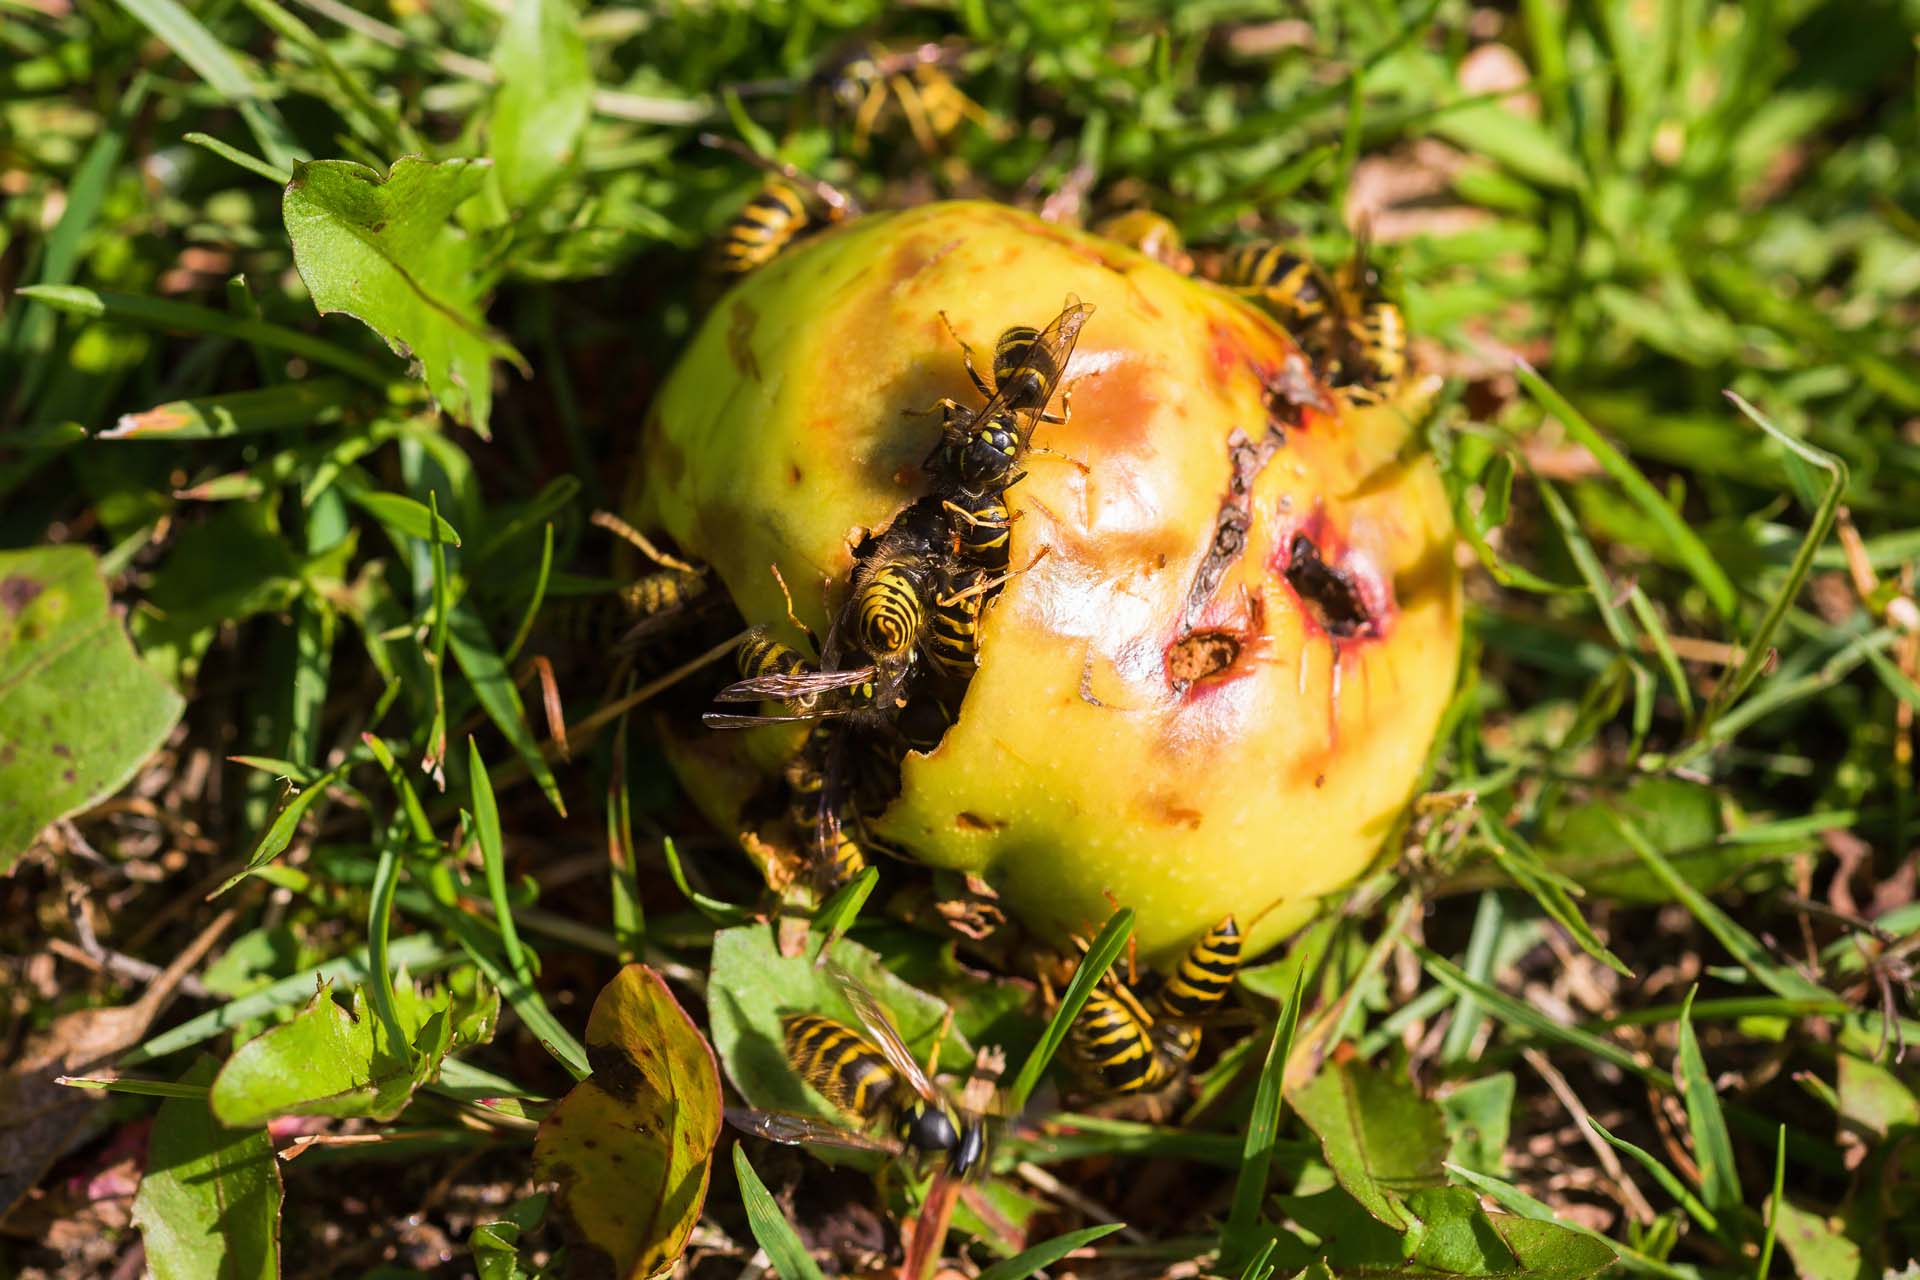 Rotting fruit lying on the grass